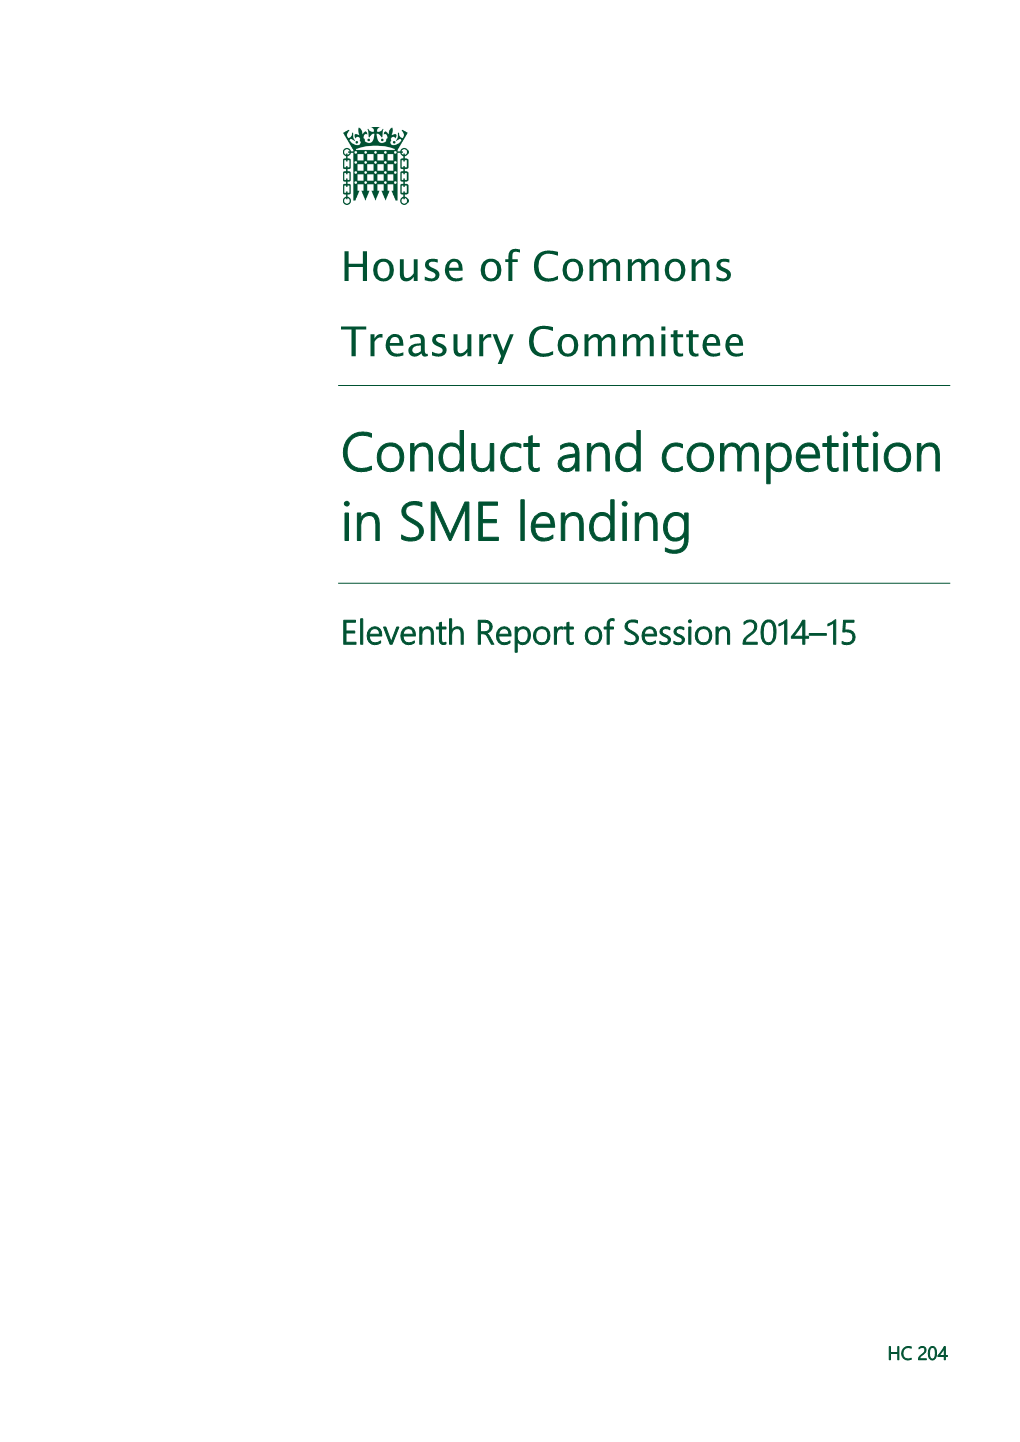 Conduct and Competition in SME Lending